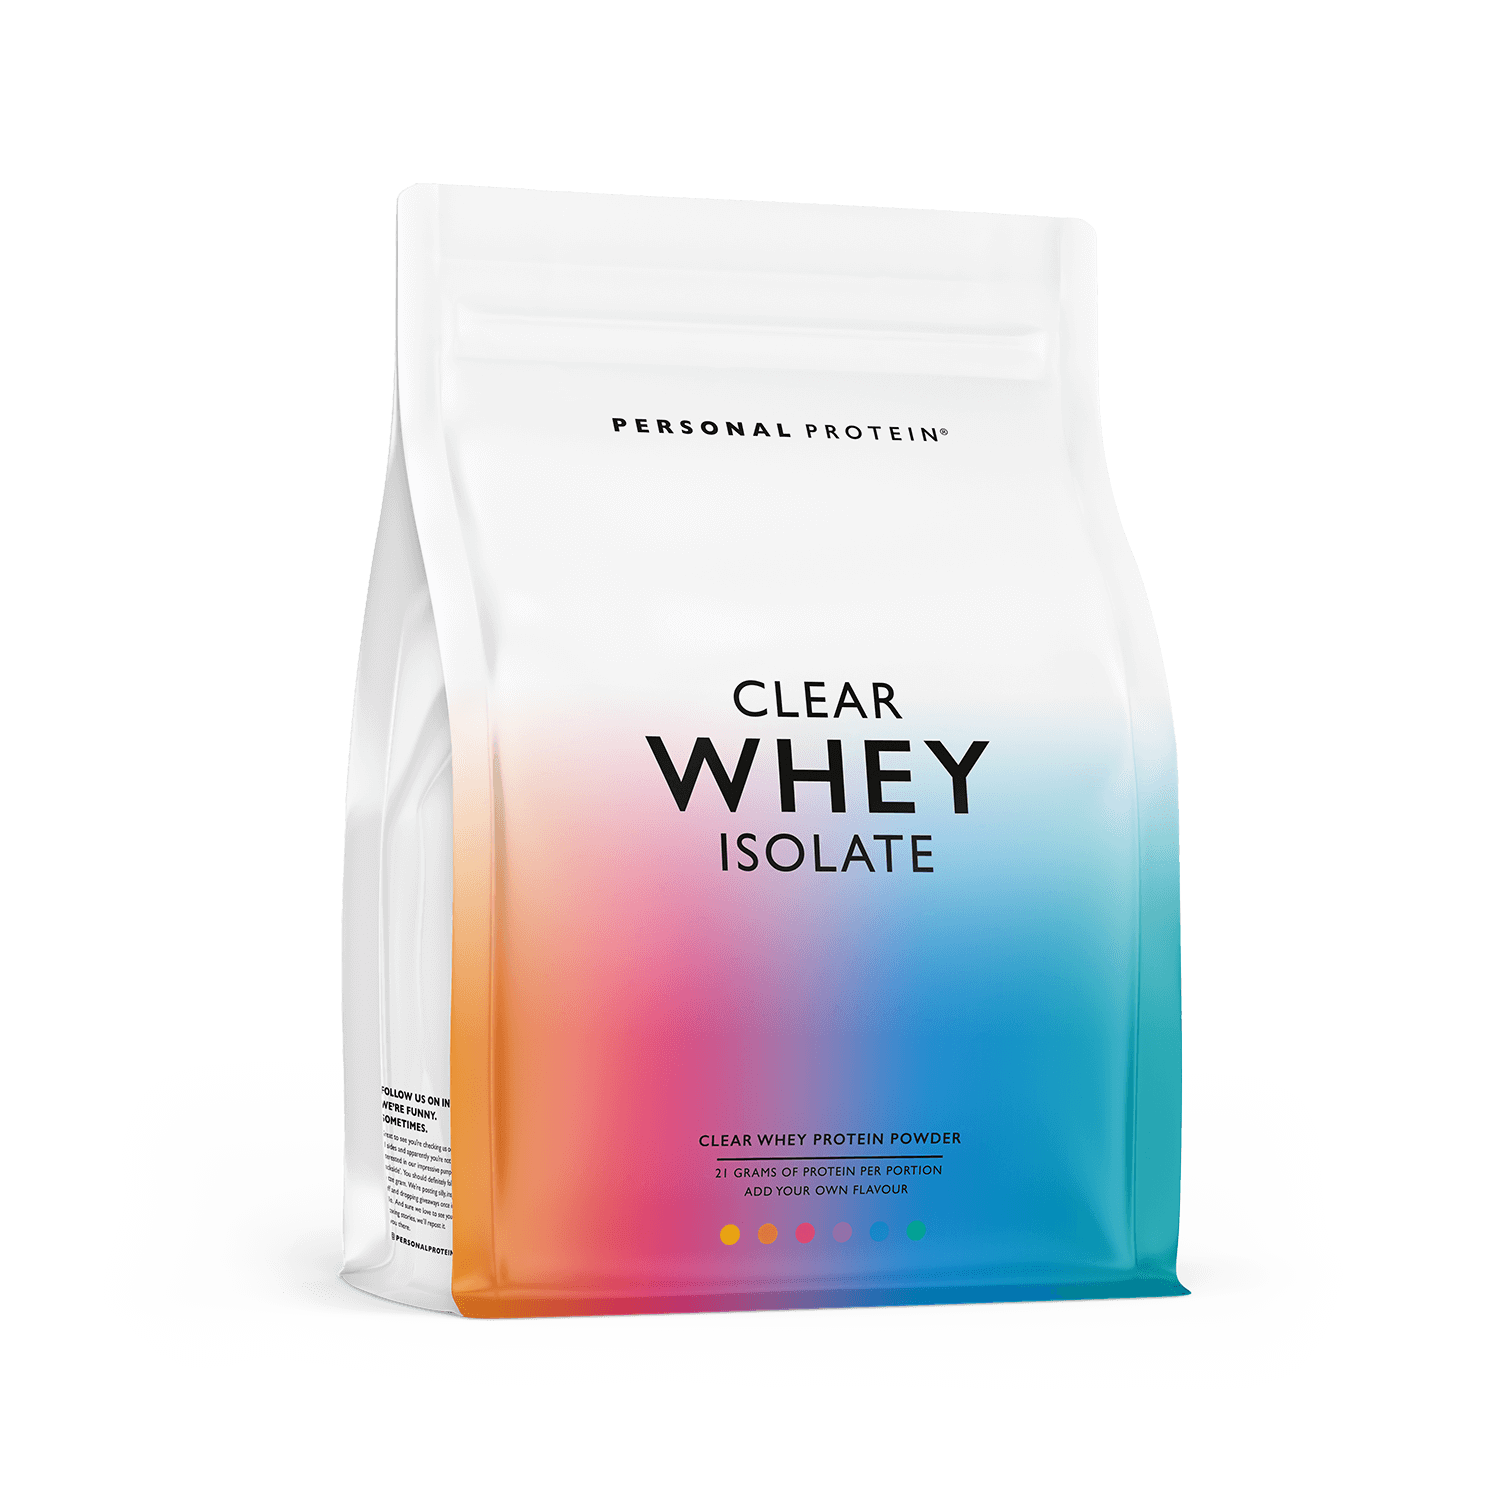 Clear Whey Isolate Personal Protein®